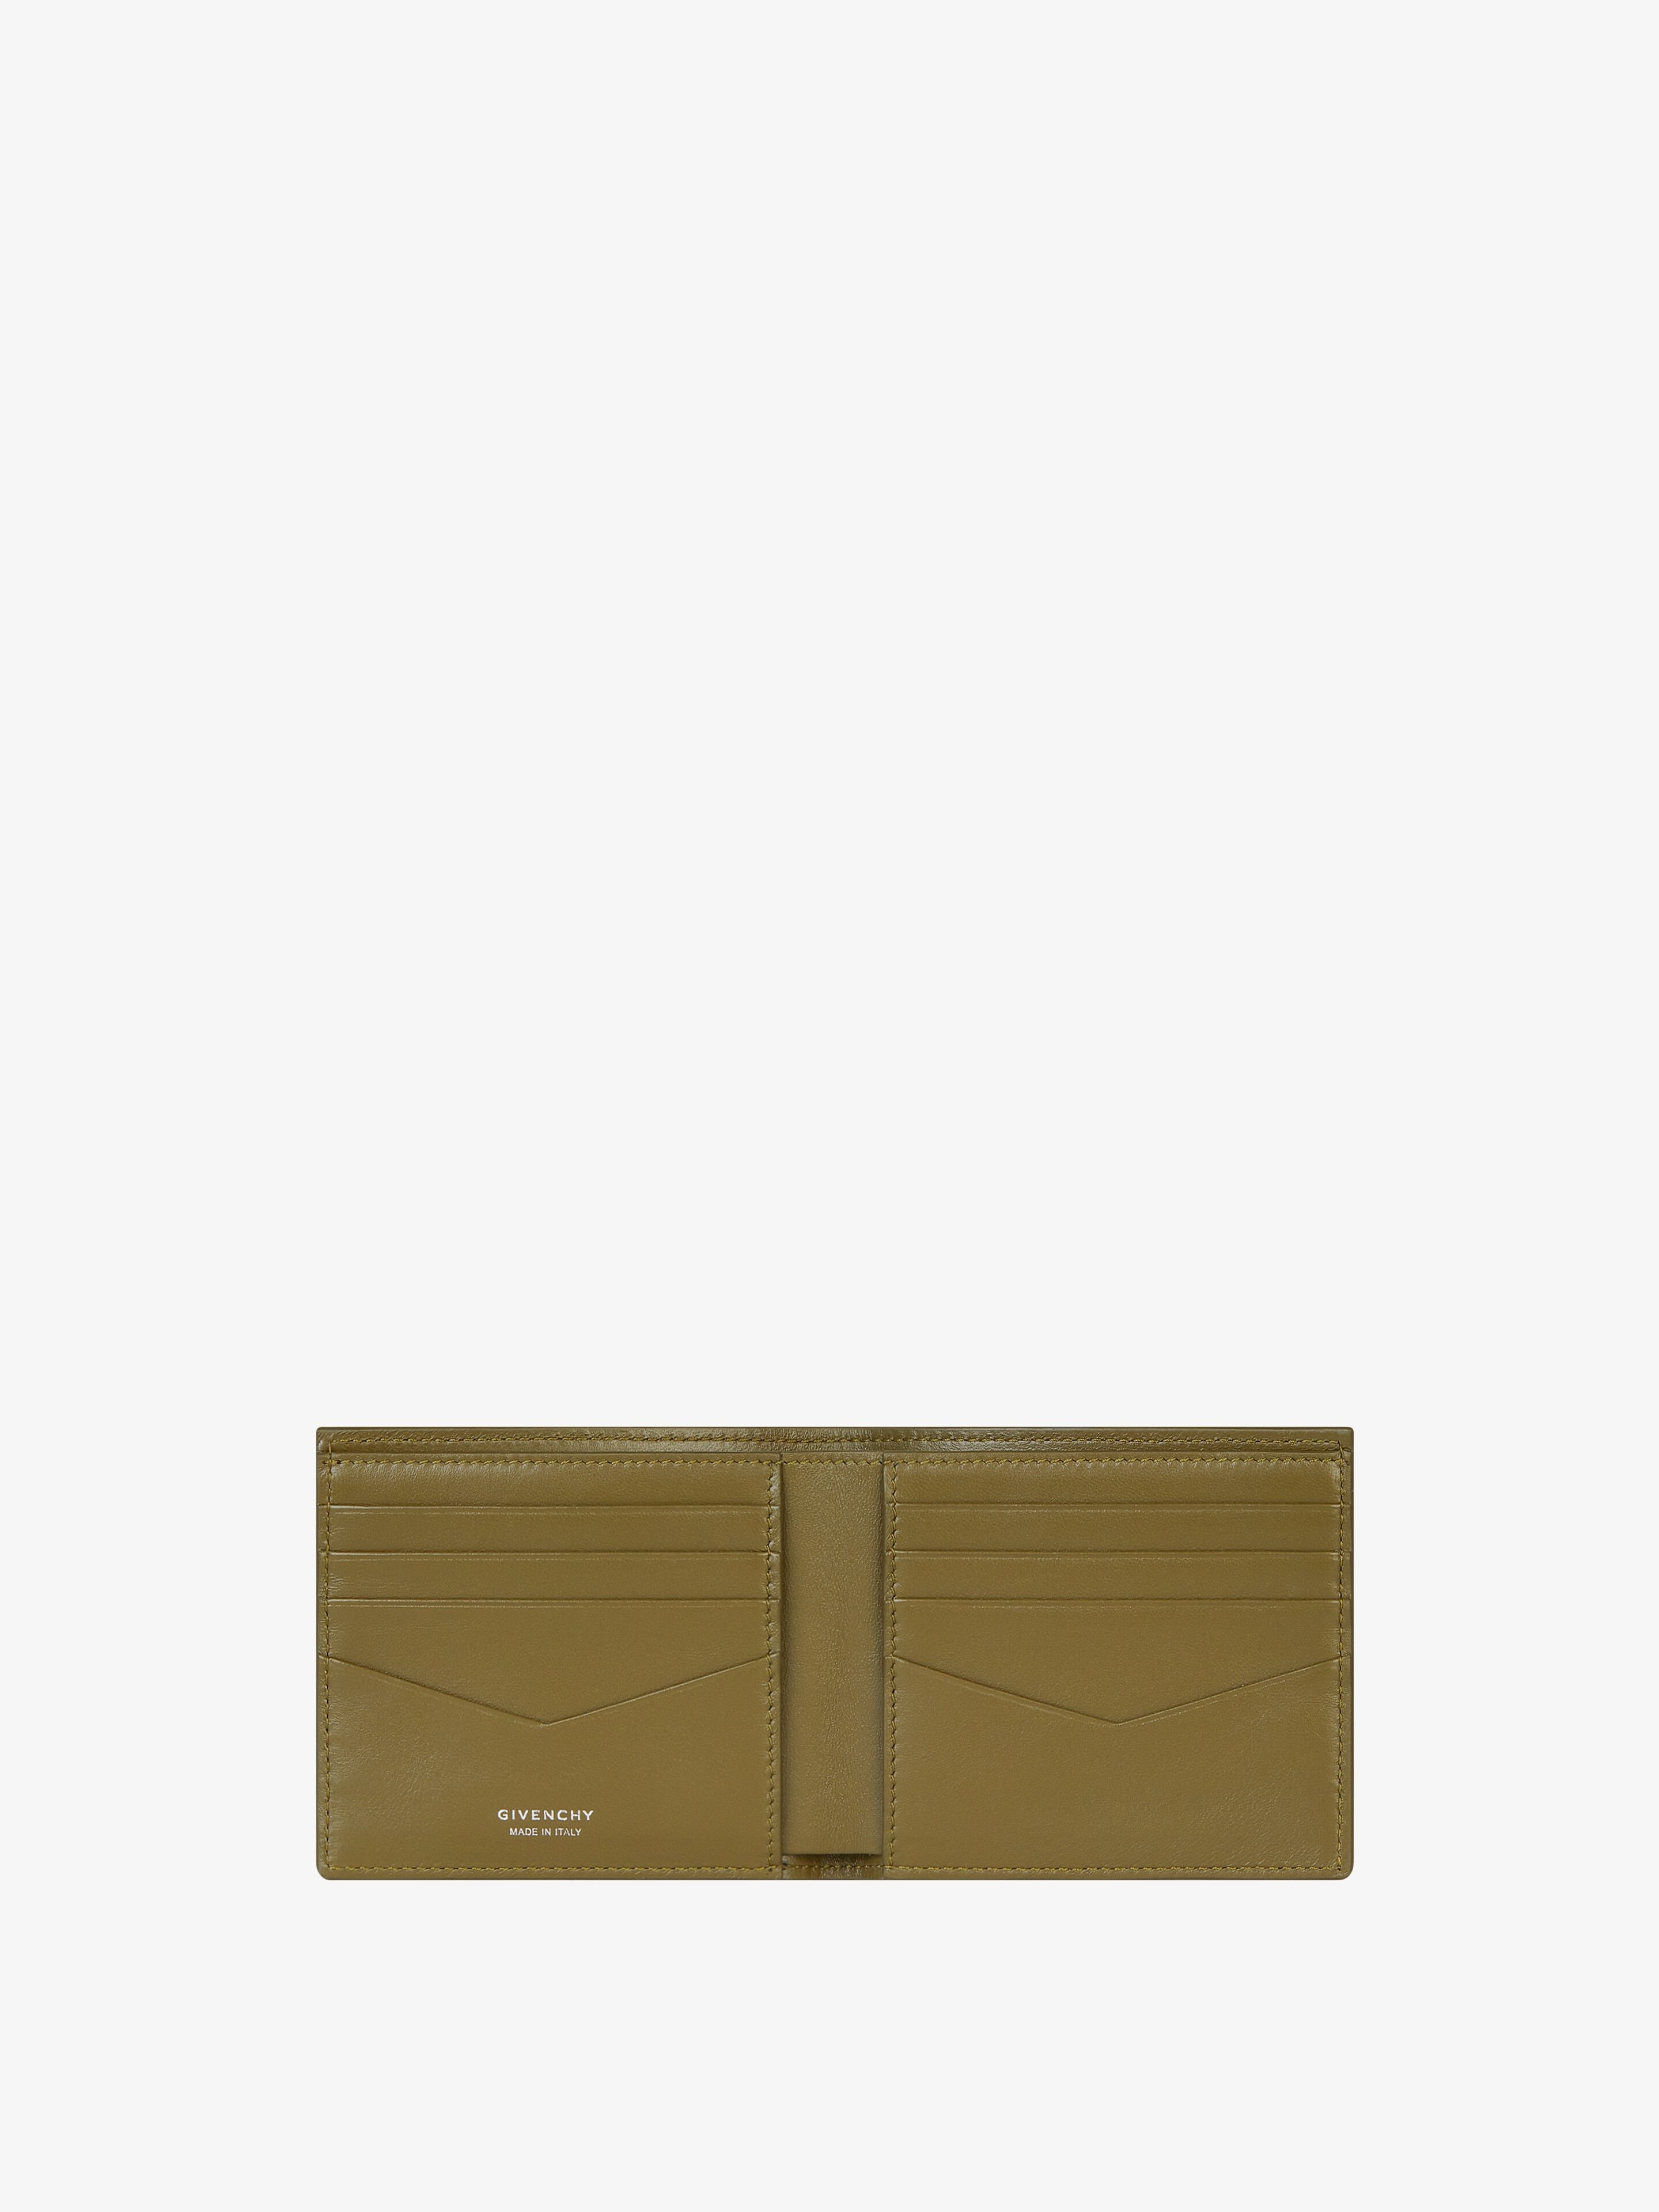 GIVENCHY WALLET IN BRAIDED-EFFECT LEATHER - 4